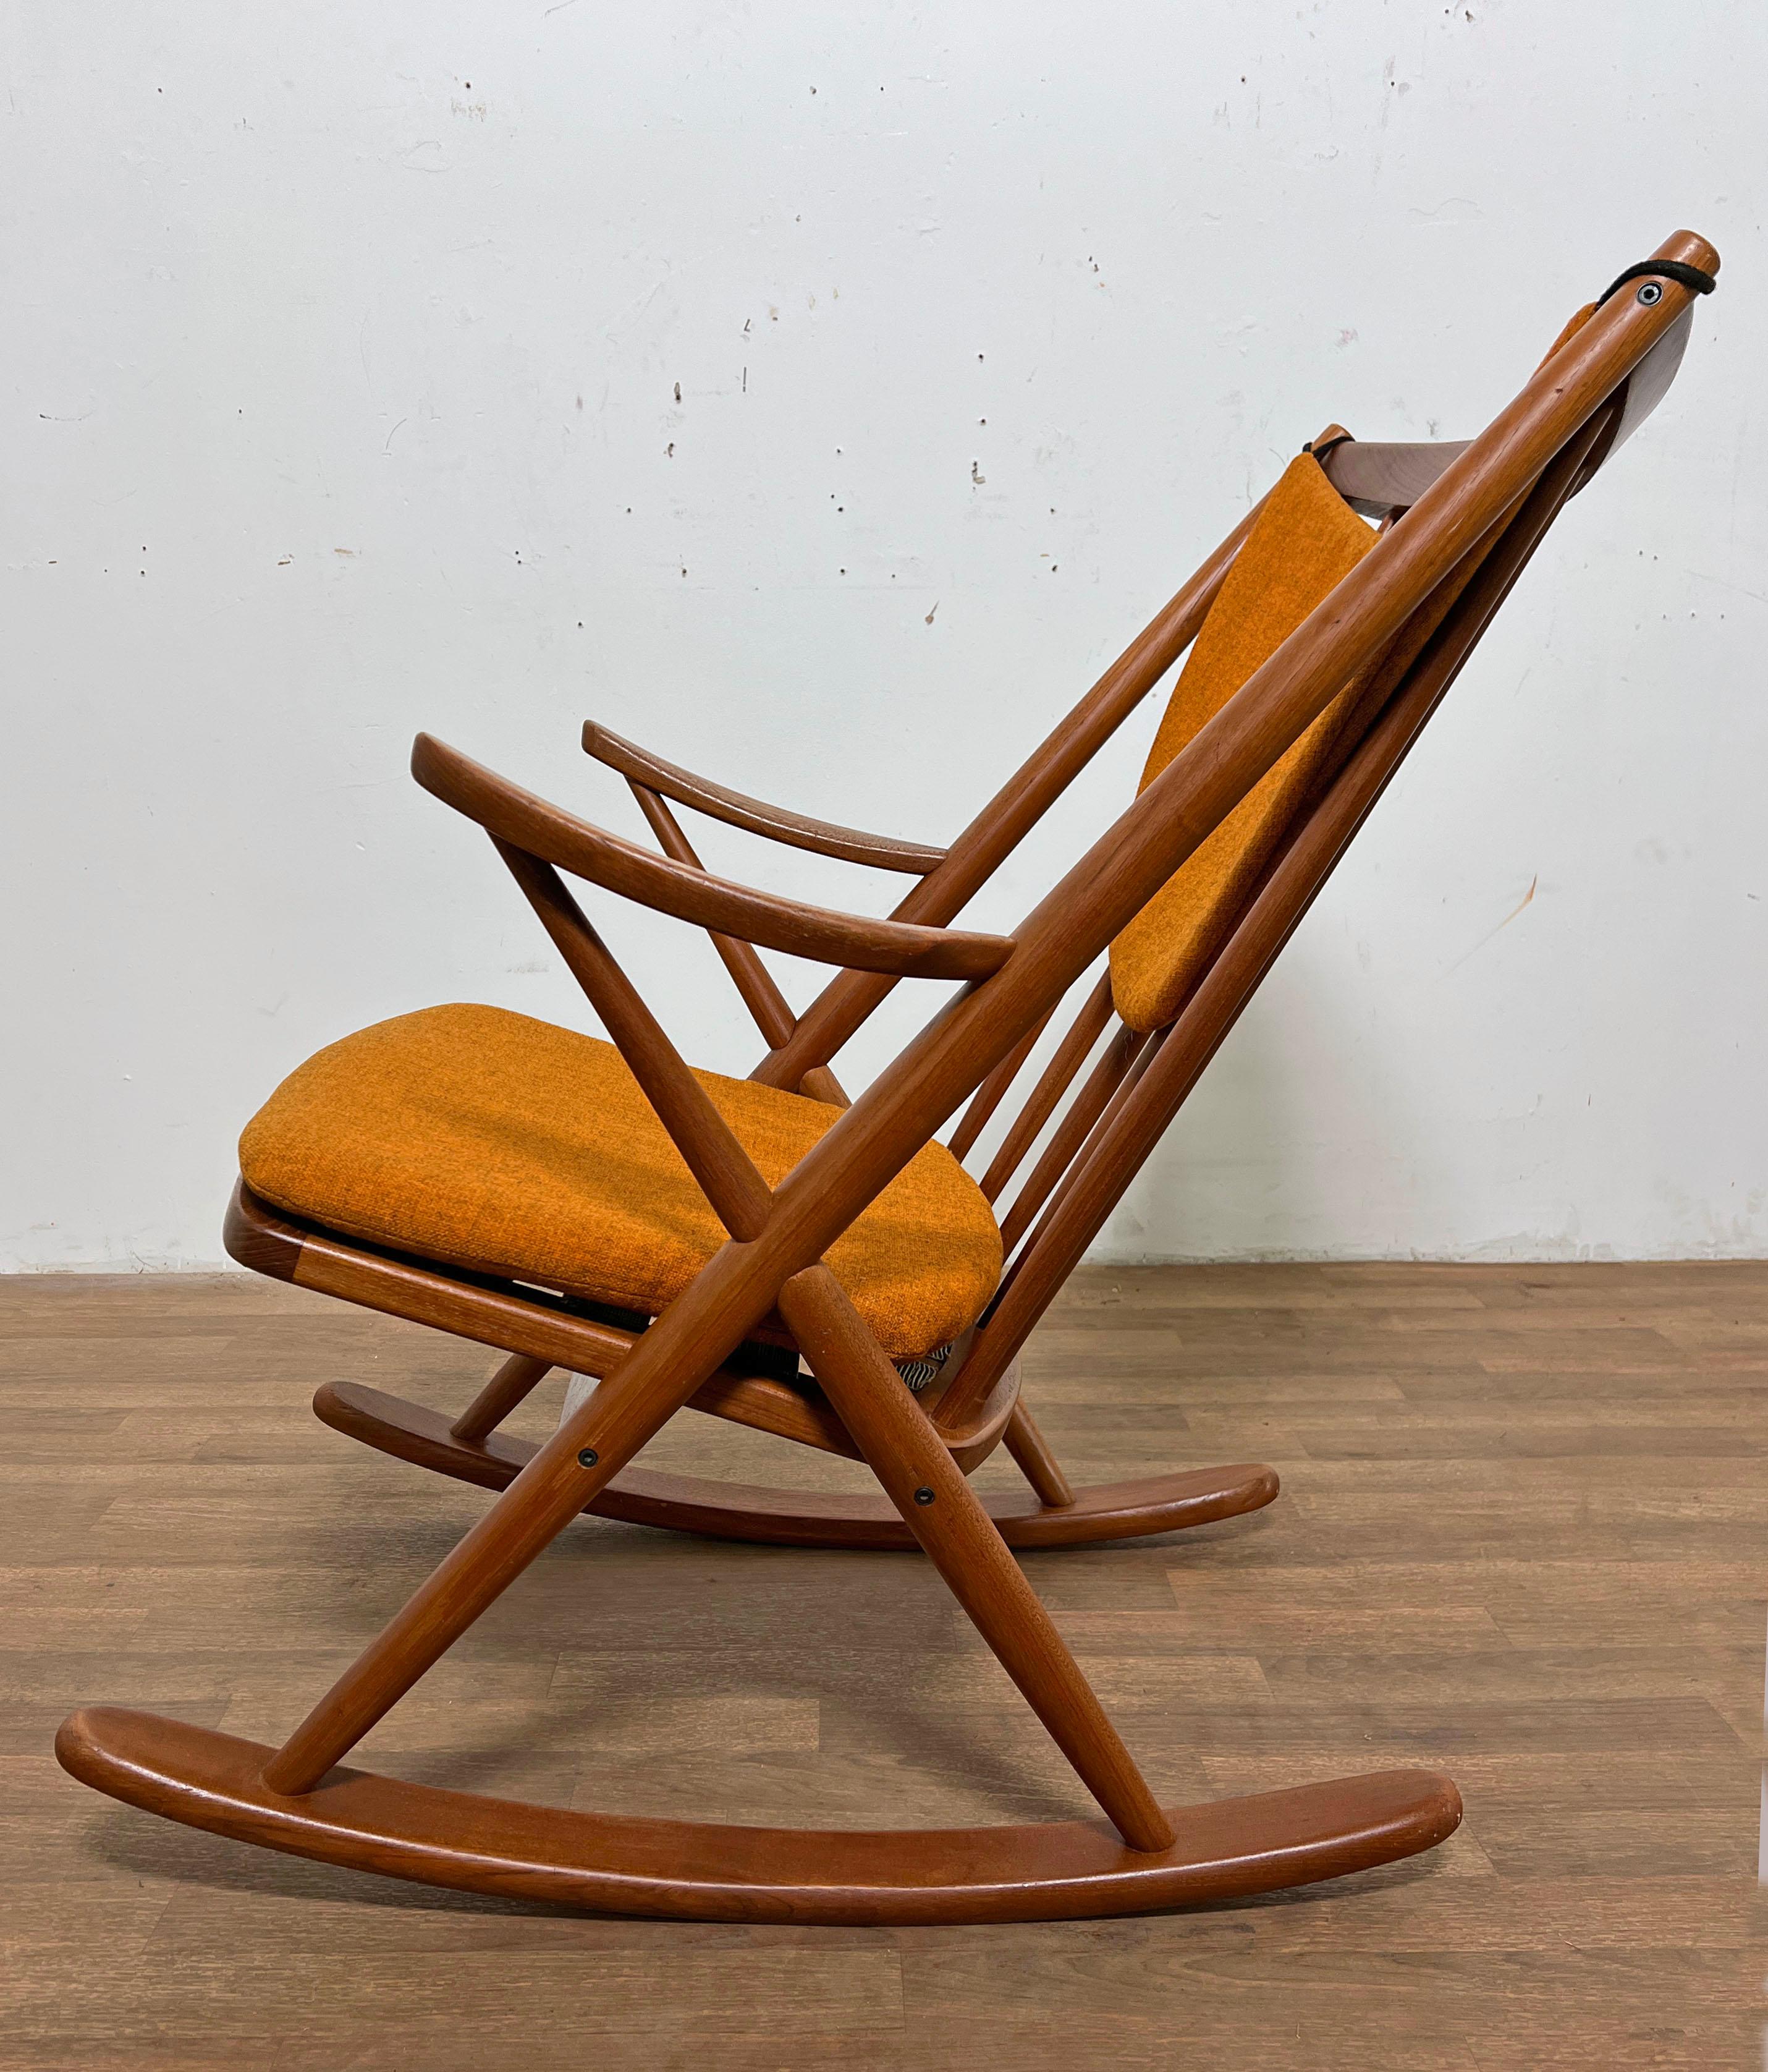 Classic teak rocking chair by Frank Reenskaug with original upholstered seat and back cushion, in fine and supple condition. Designed for Bramin Møbler, circa 1960s.